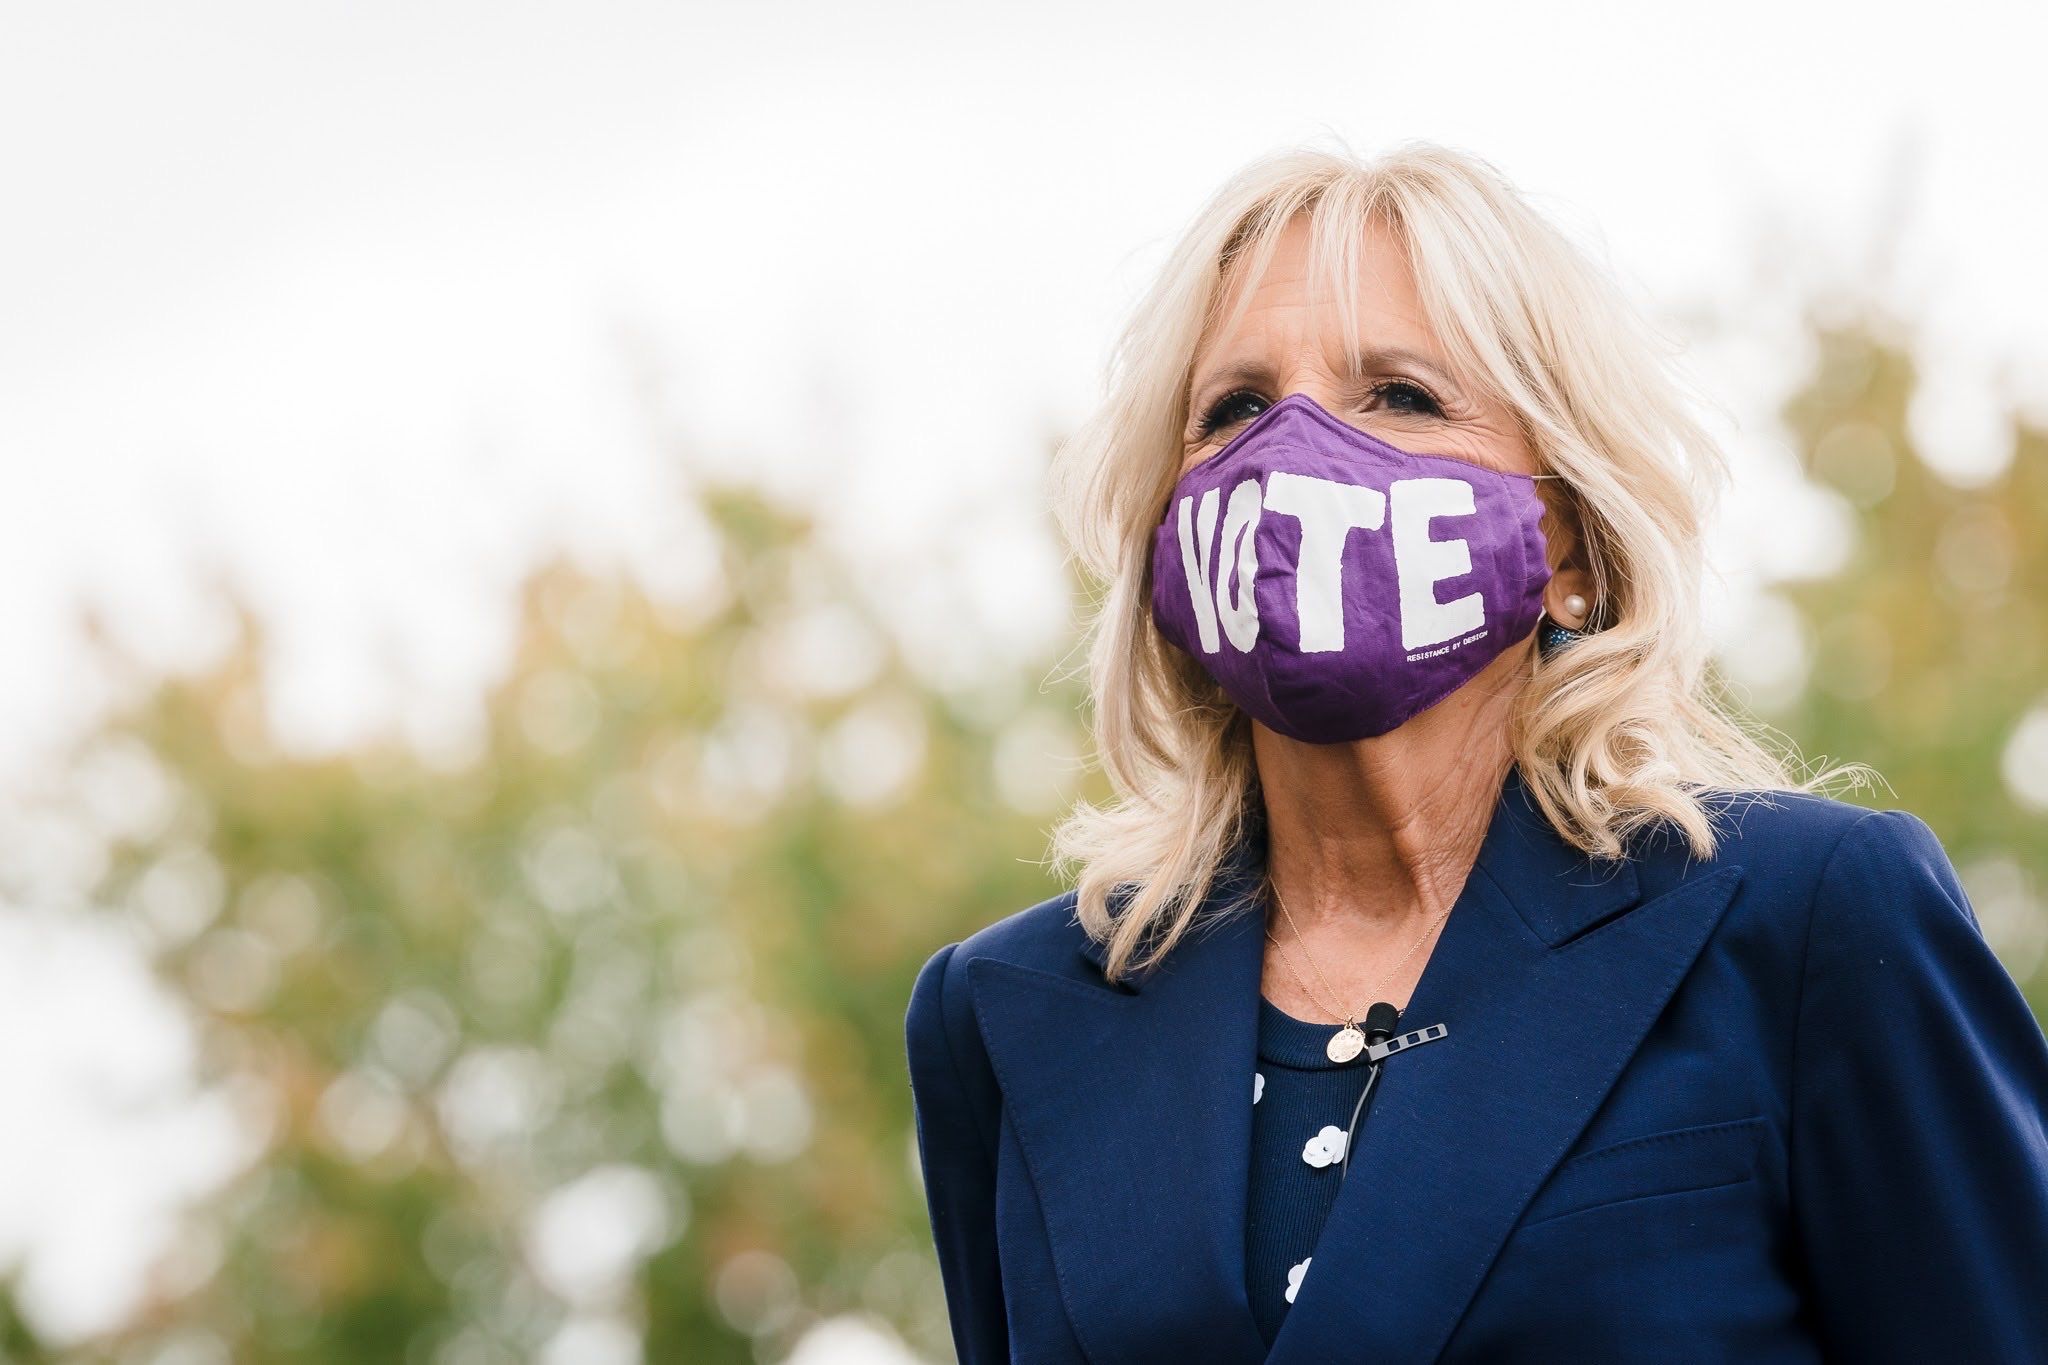 Dr Jill Biden: Future First Lady says ‘Teaching is not what I do. It’s who I am’